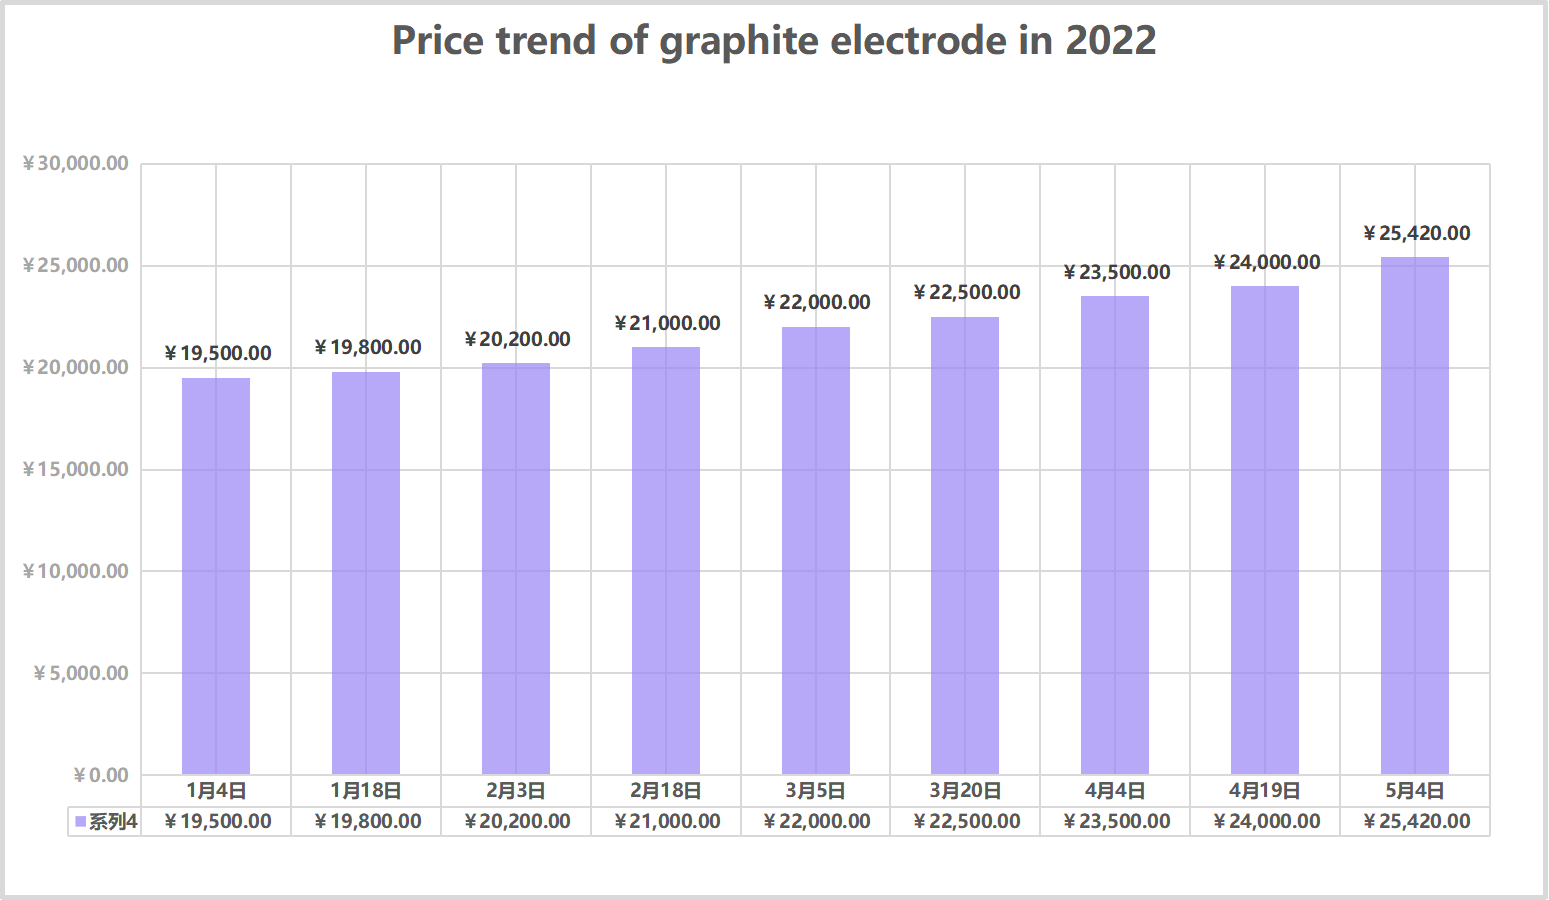 2022, the price has increased by nearly 30%!